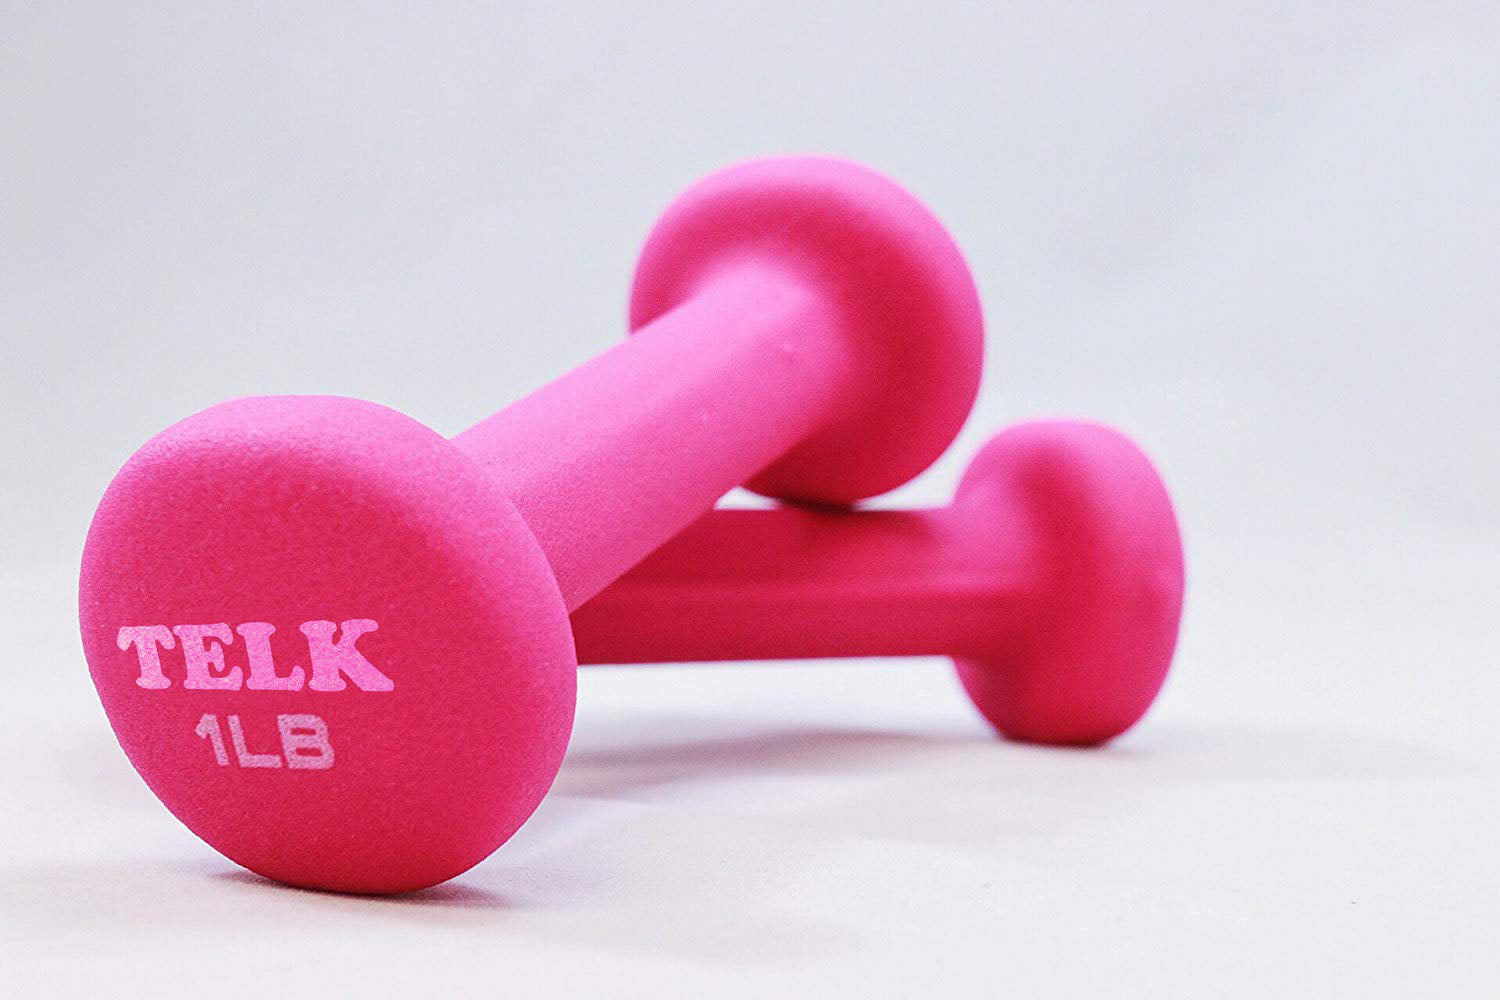 A Pair Dumbbell Barbell Neoprene Coated Weights 15 Pound Pink